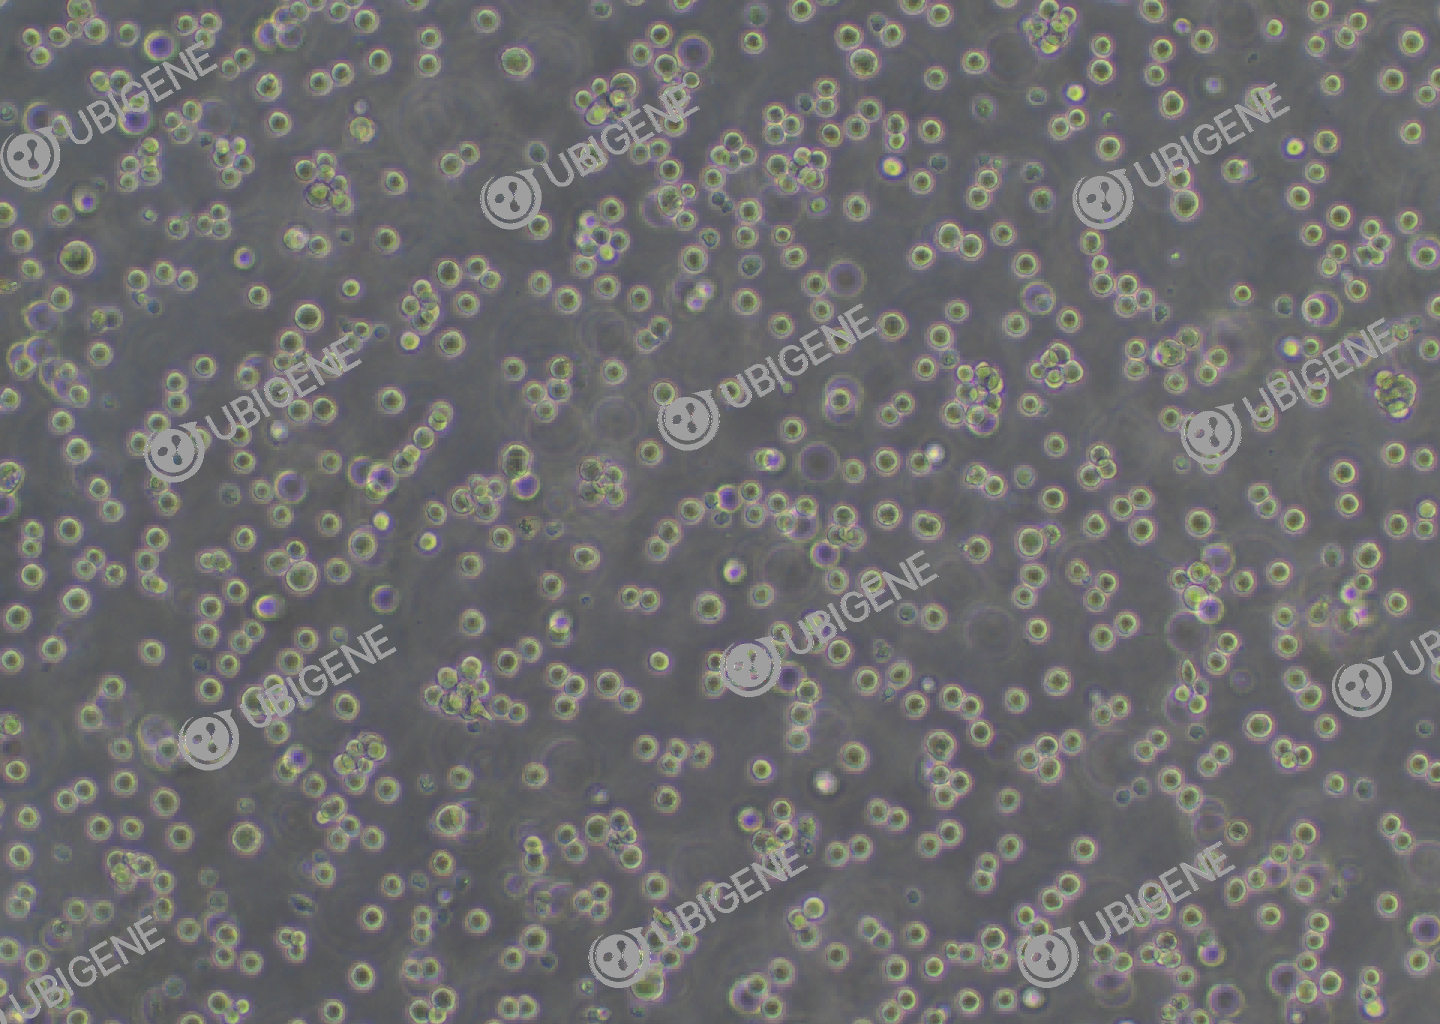 H22 cell line Cultured cell morphology